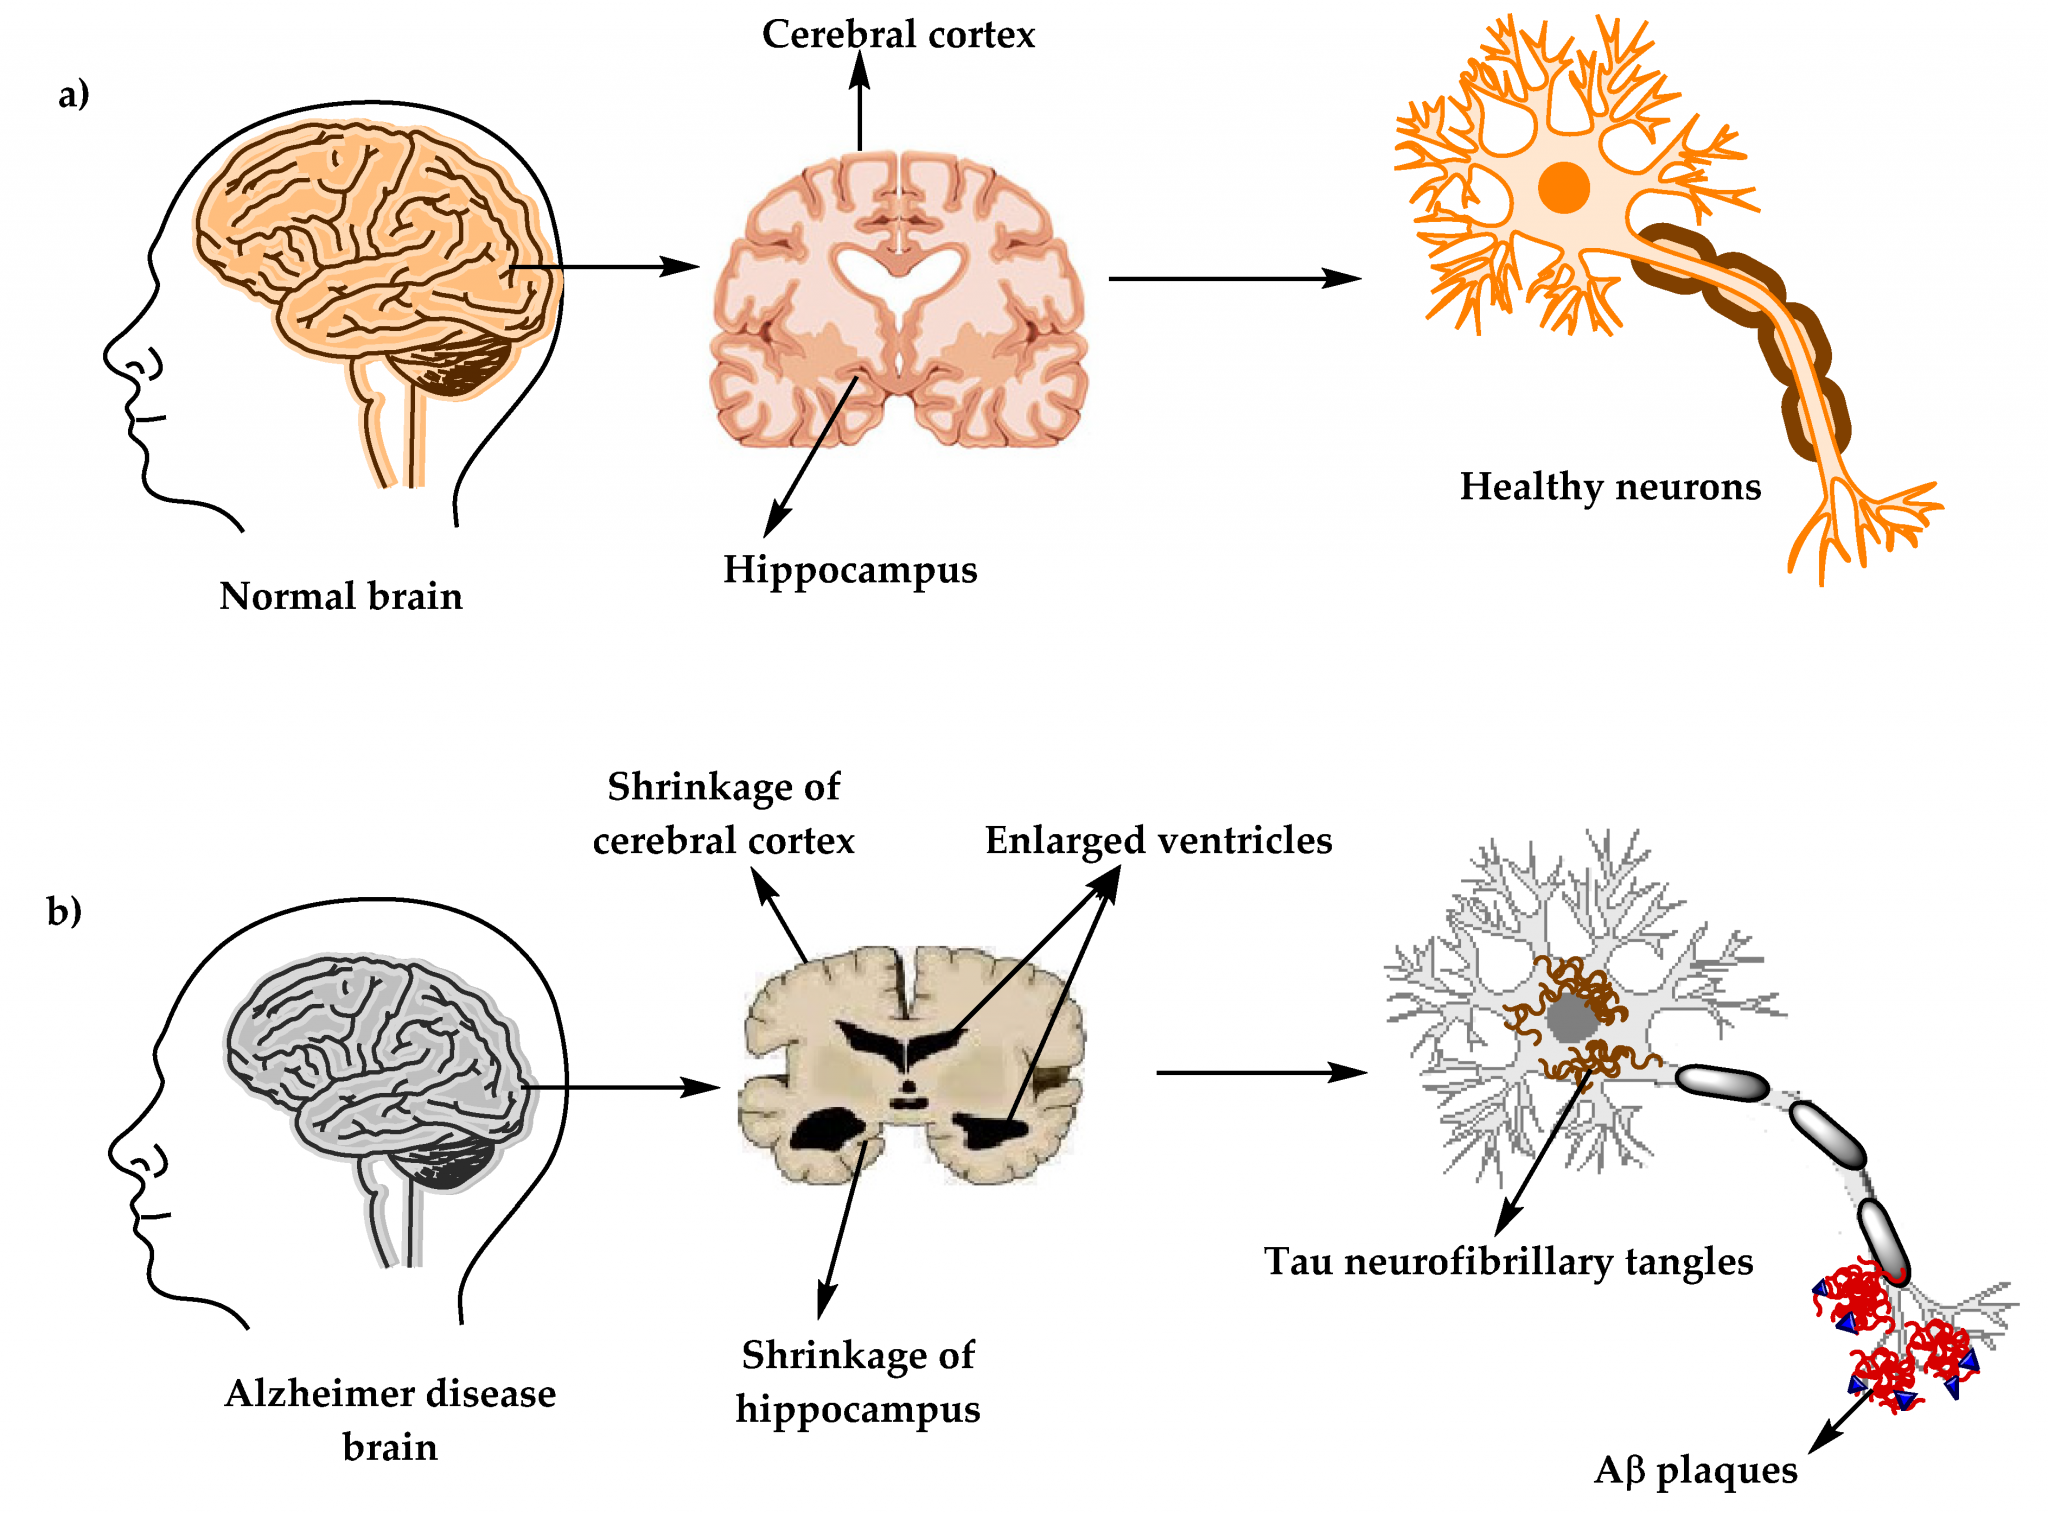 What Are the Symptoms and Stages of Alzheimer